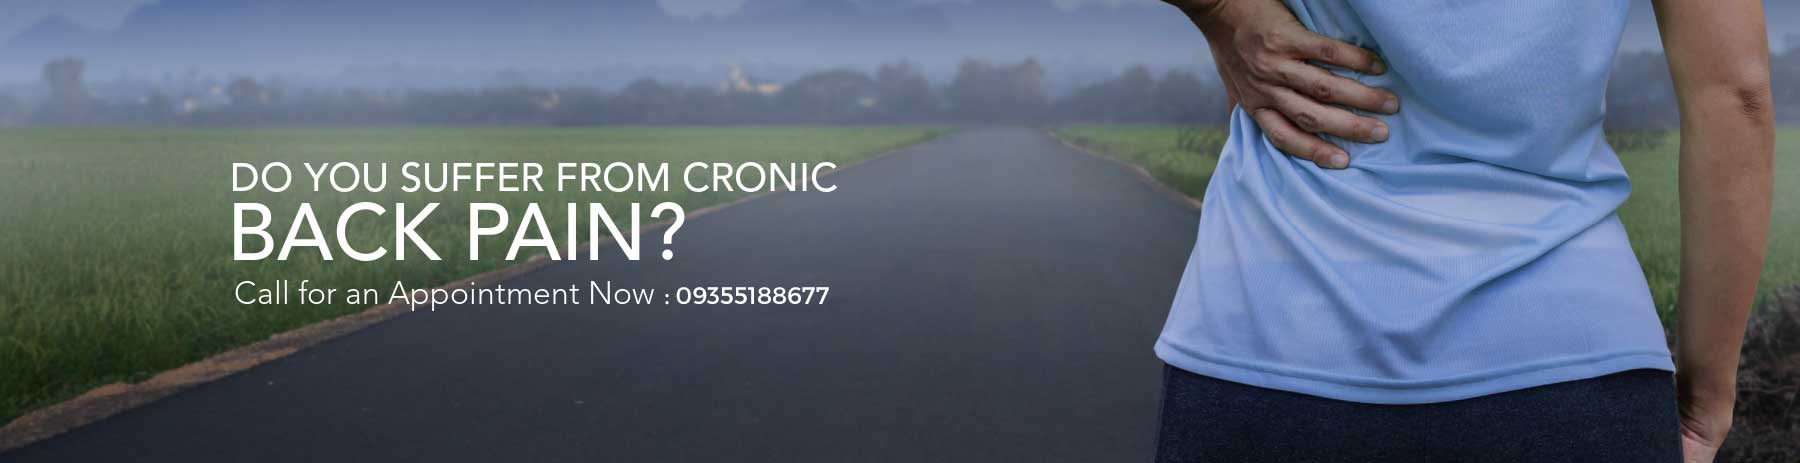 do you suffer from cronic back pain?